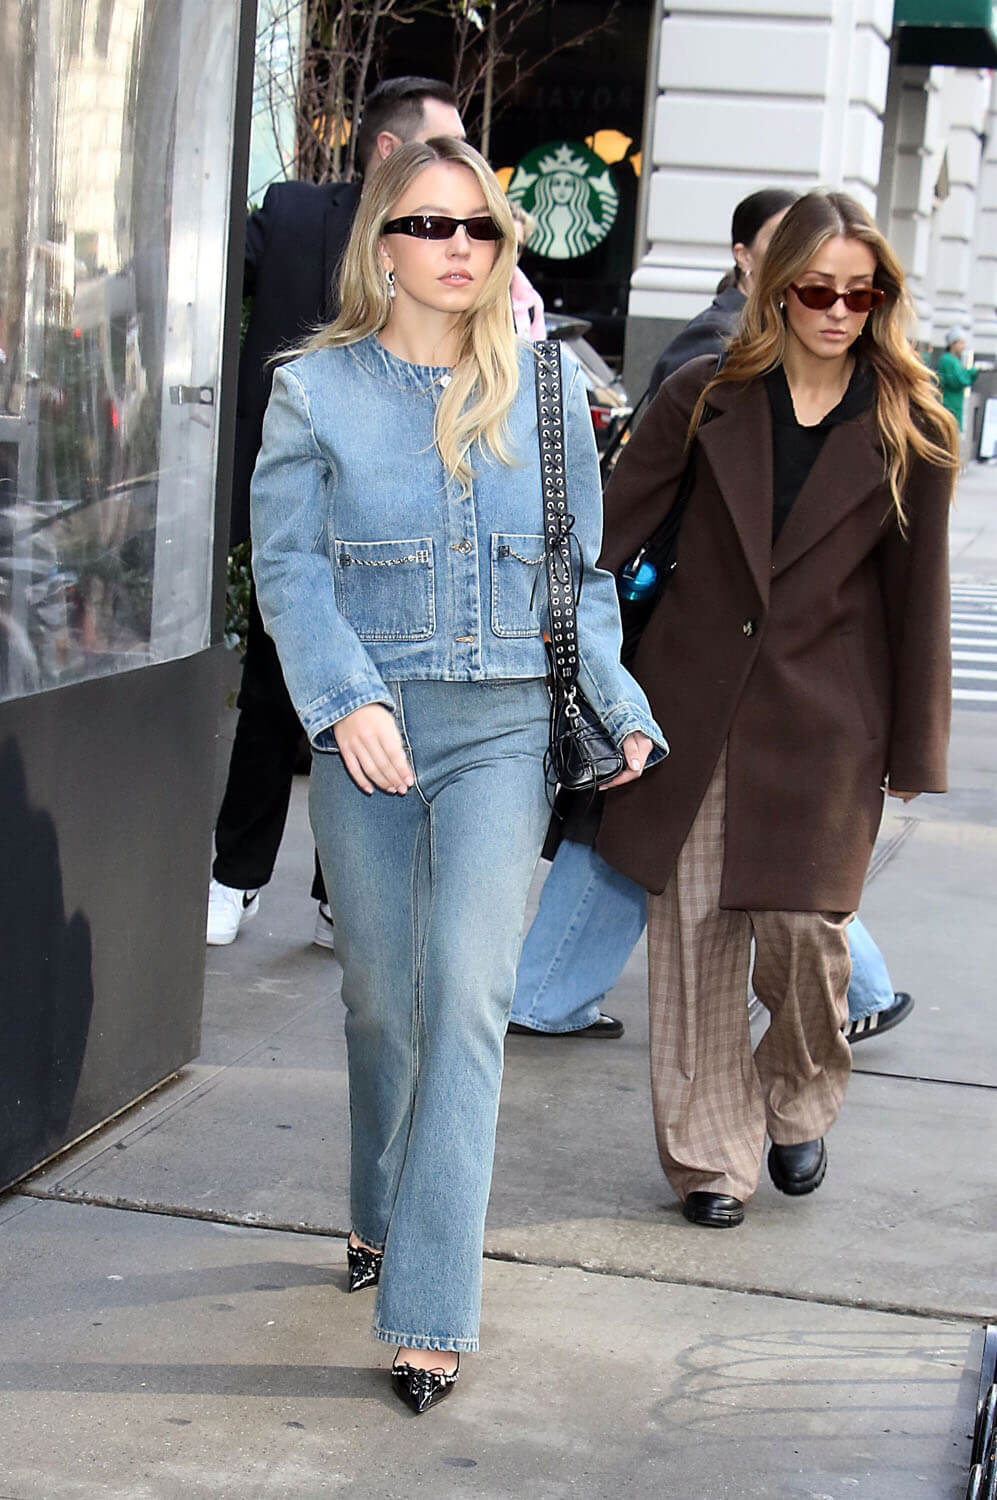 Sydney Sweeney Looks Effortlessly Chic In Double Denim In NYC As She  Prepares To Host 'SNL' In March - SHEfinds